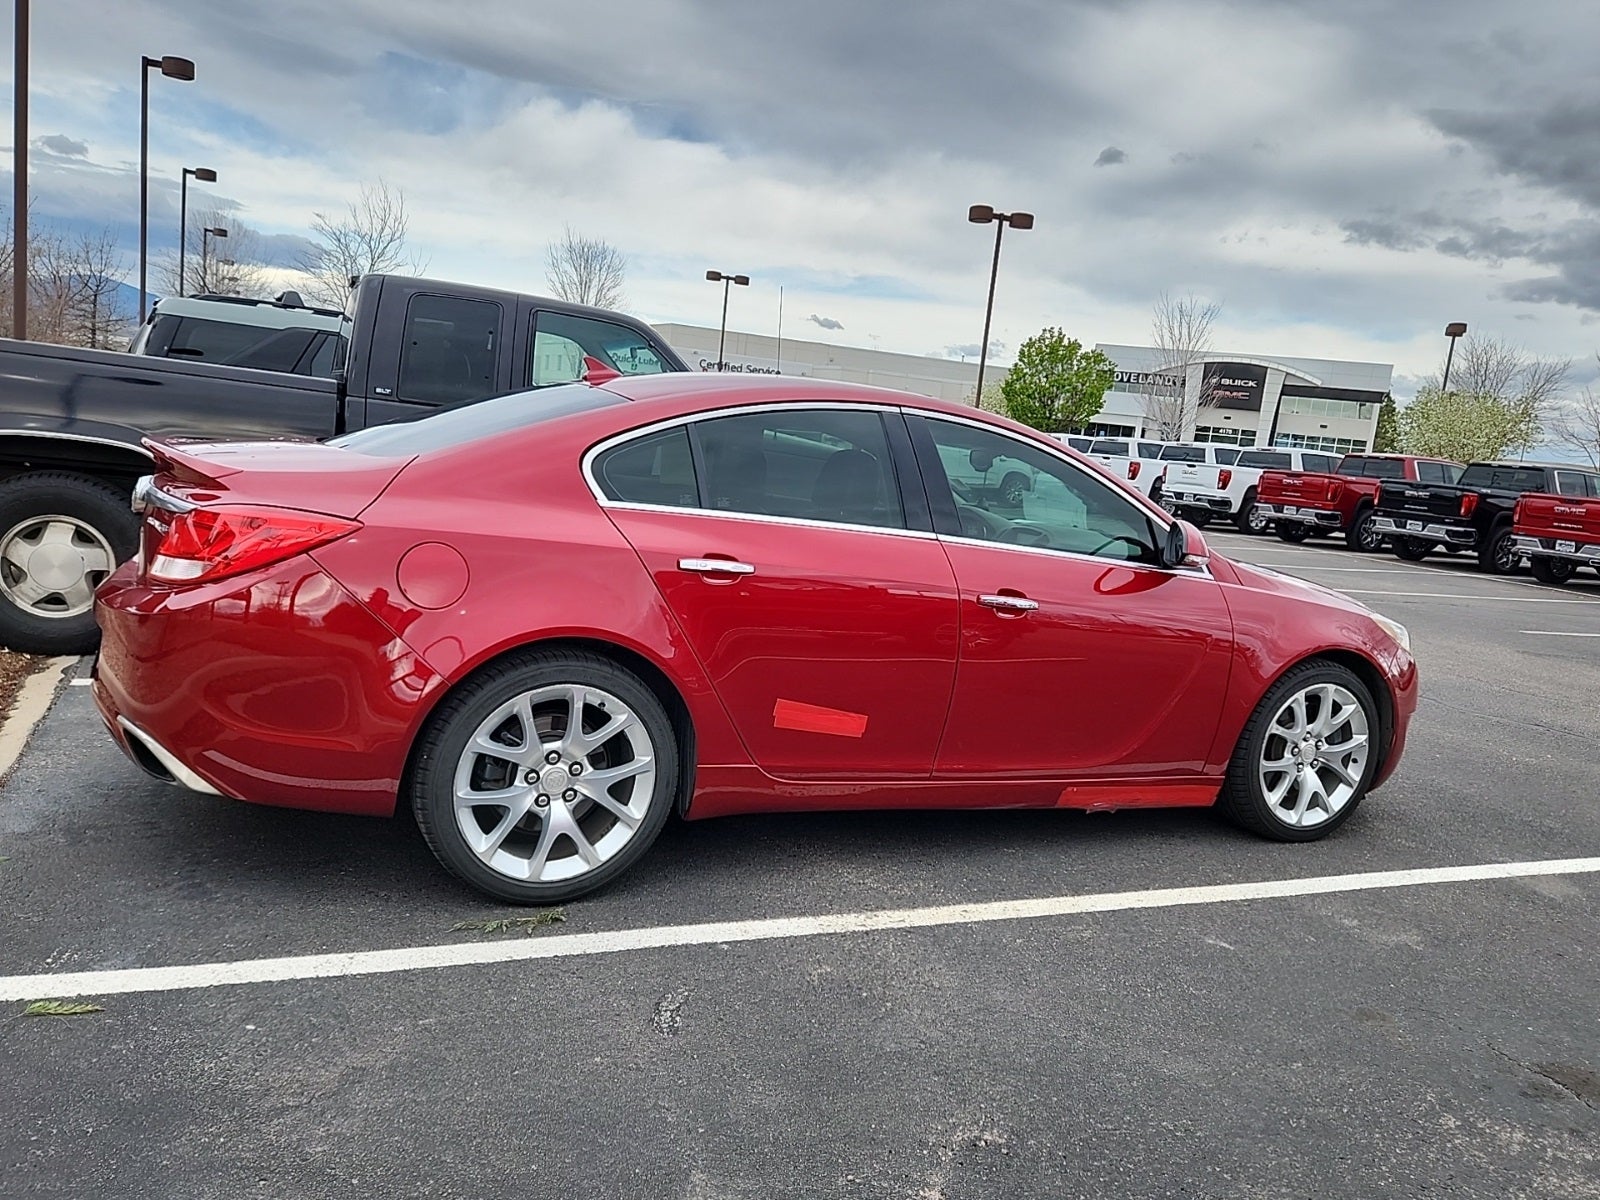 Used 2013 Buick Regal GS with VIN 2G4GV5GV7D9227434 for sale in Loveland, CO